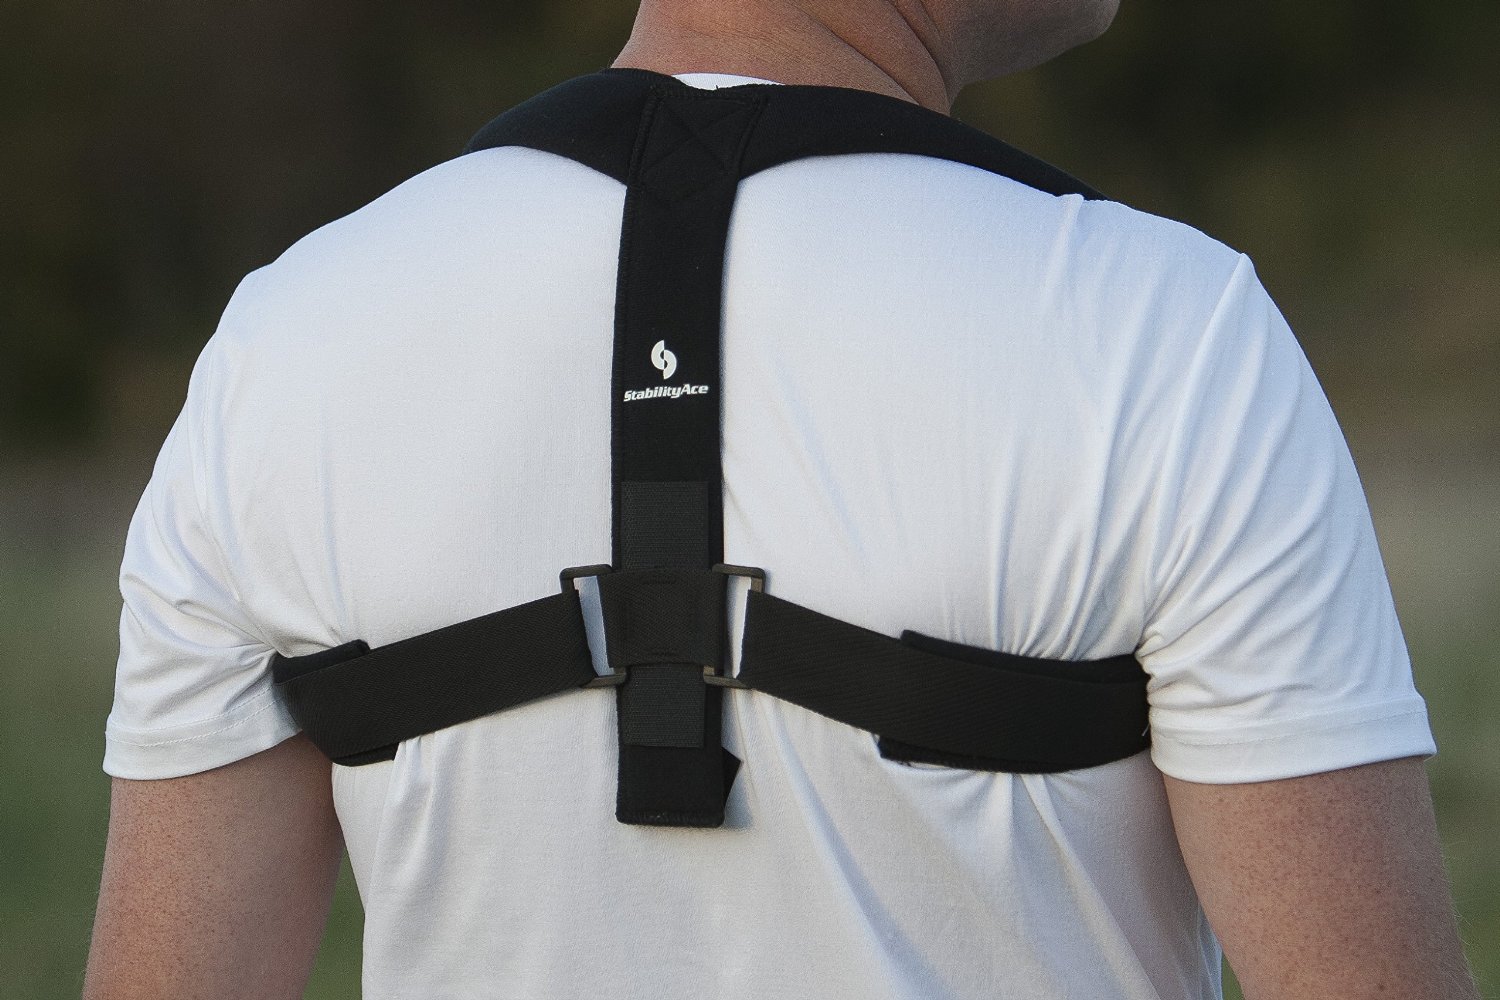 StabilityAce Upper Back Posture Corrector Brace and Clavicle Support